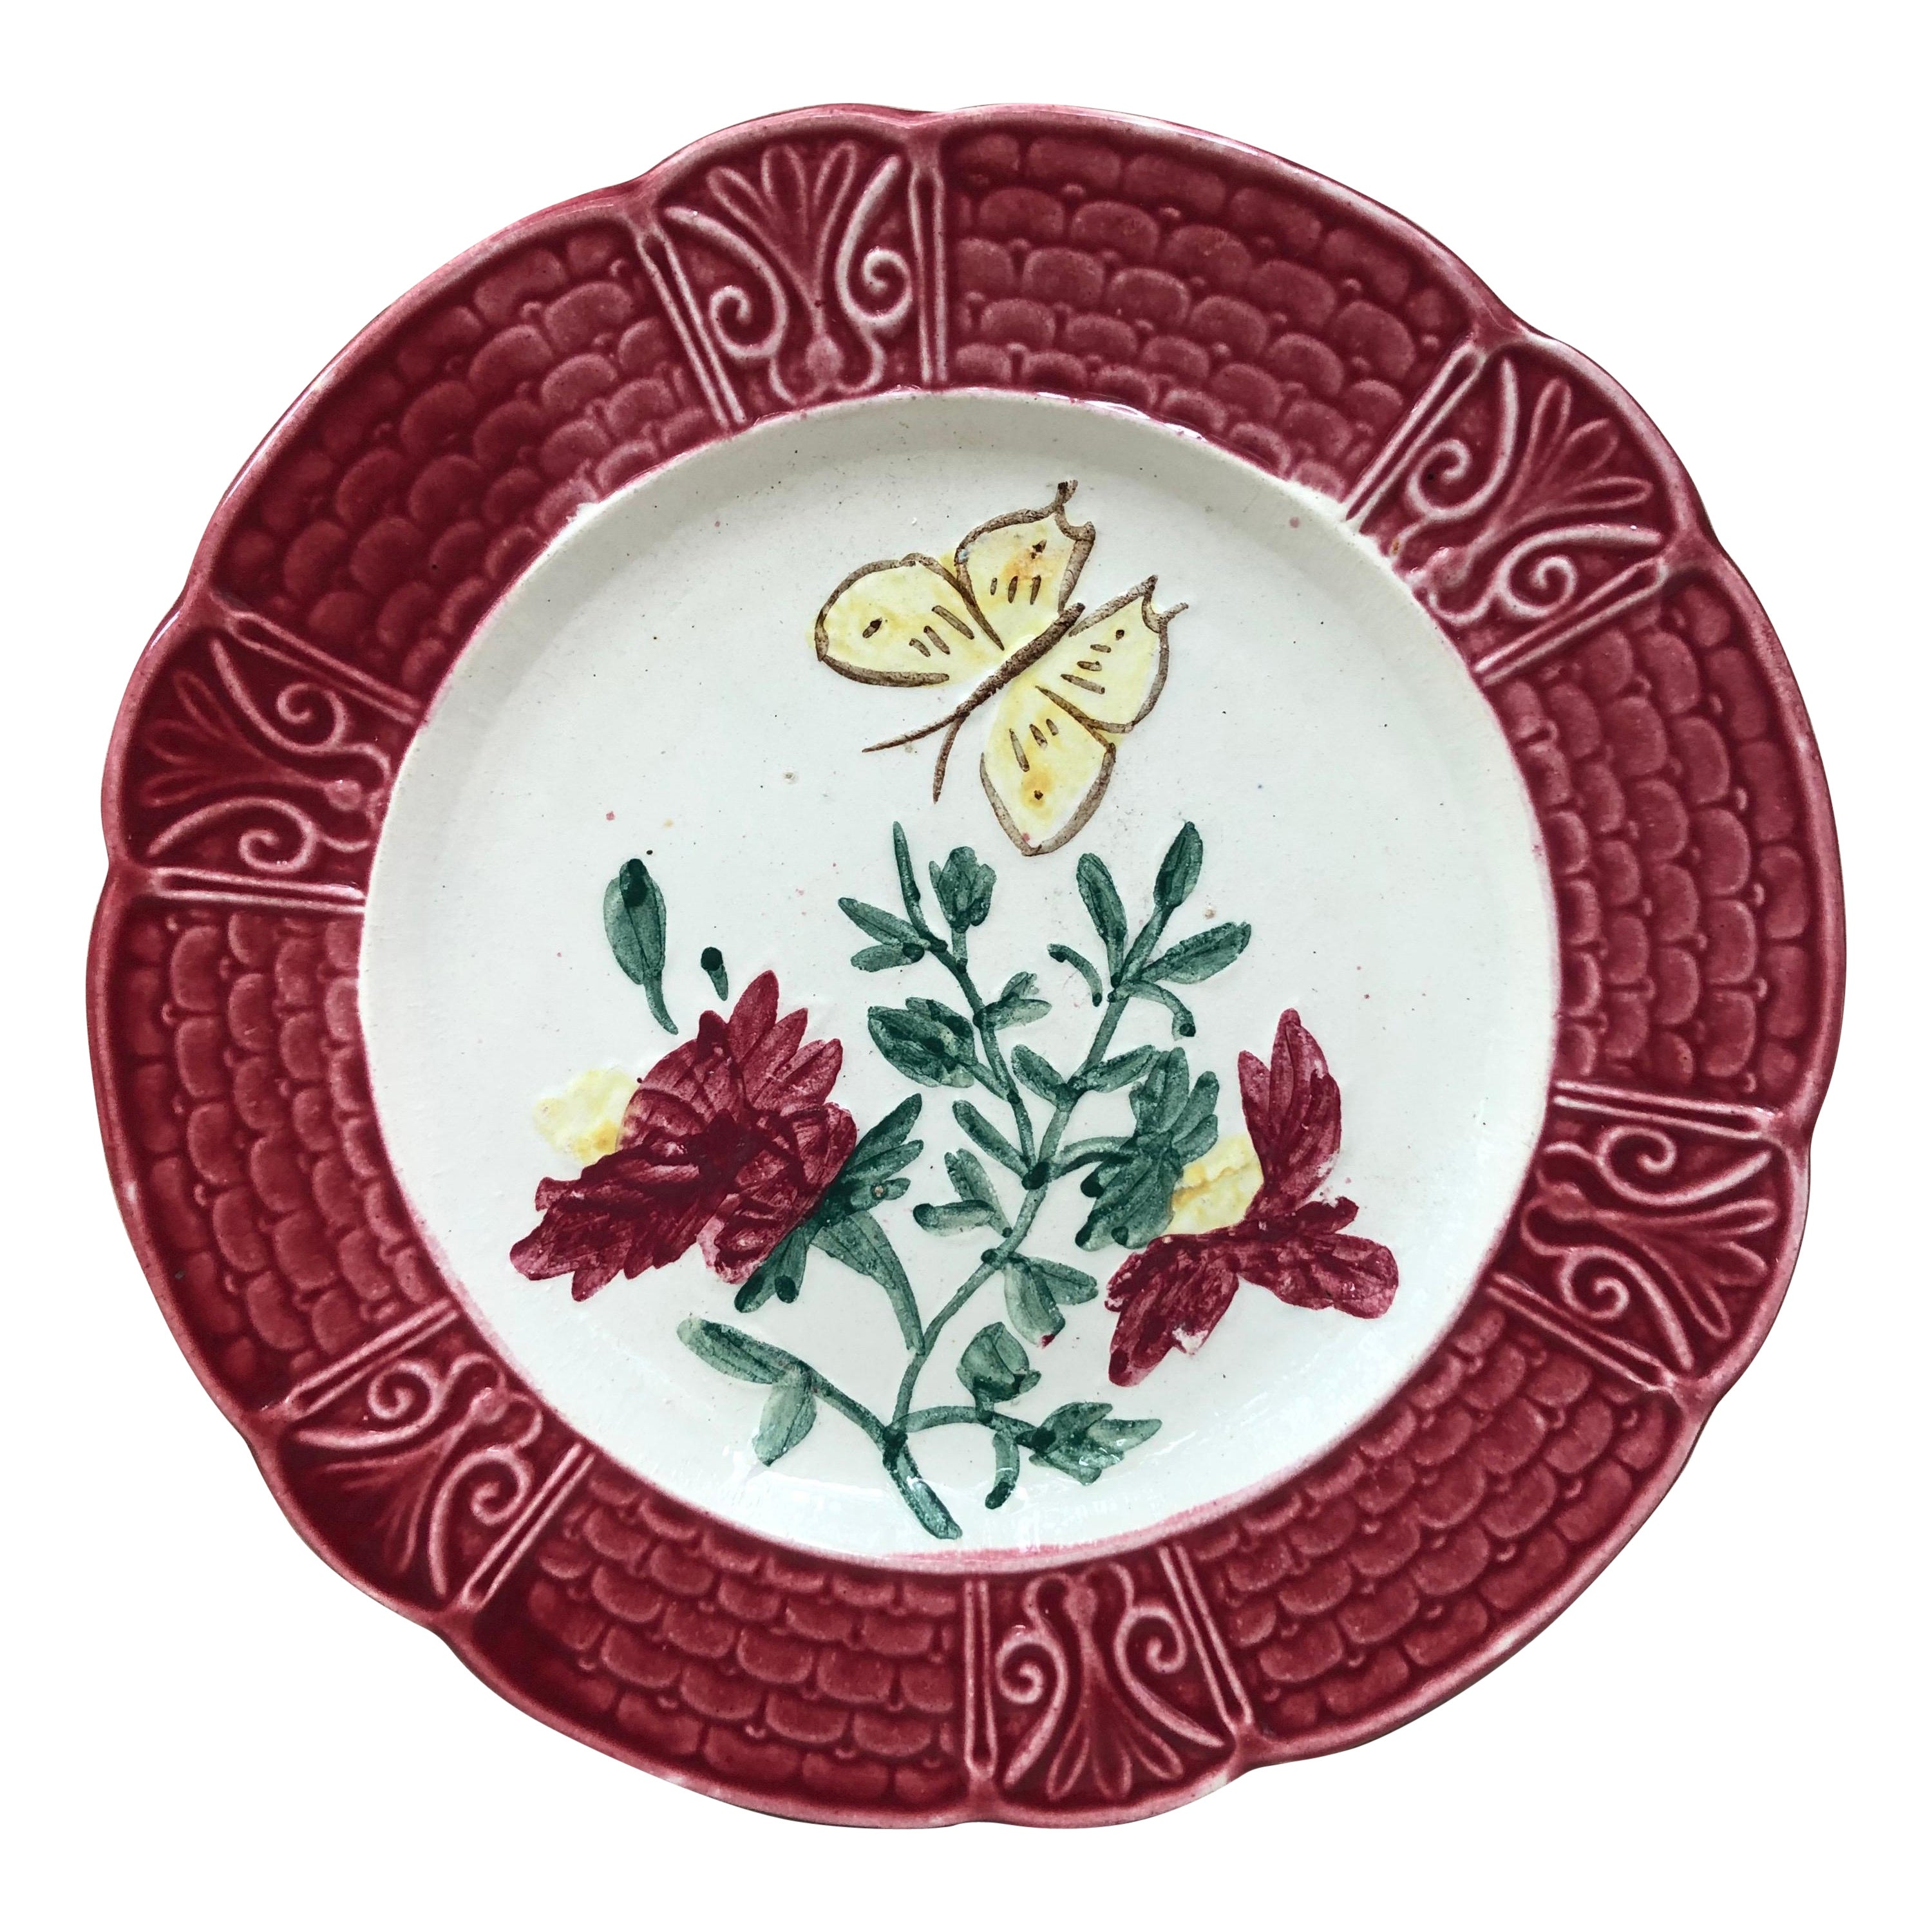 French Majolica Plate with Flowers & Butterfly, Circa 1900